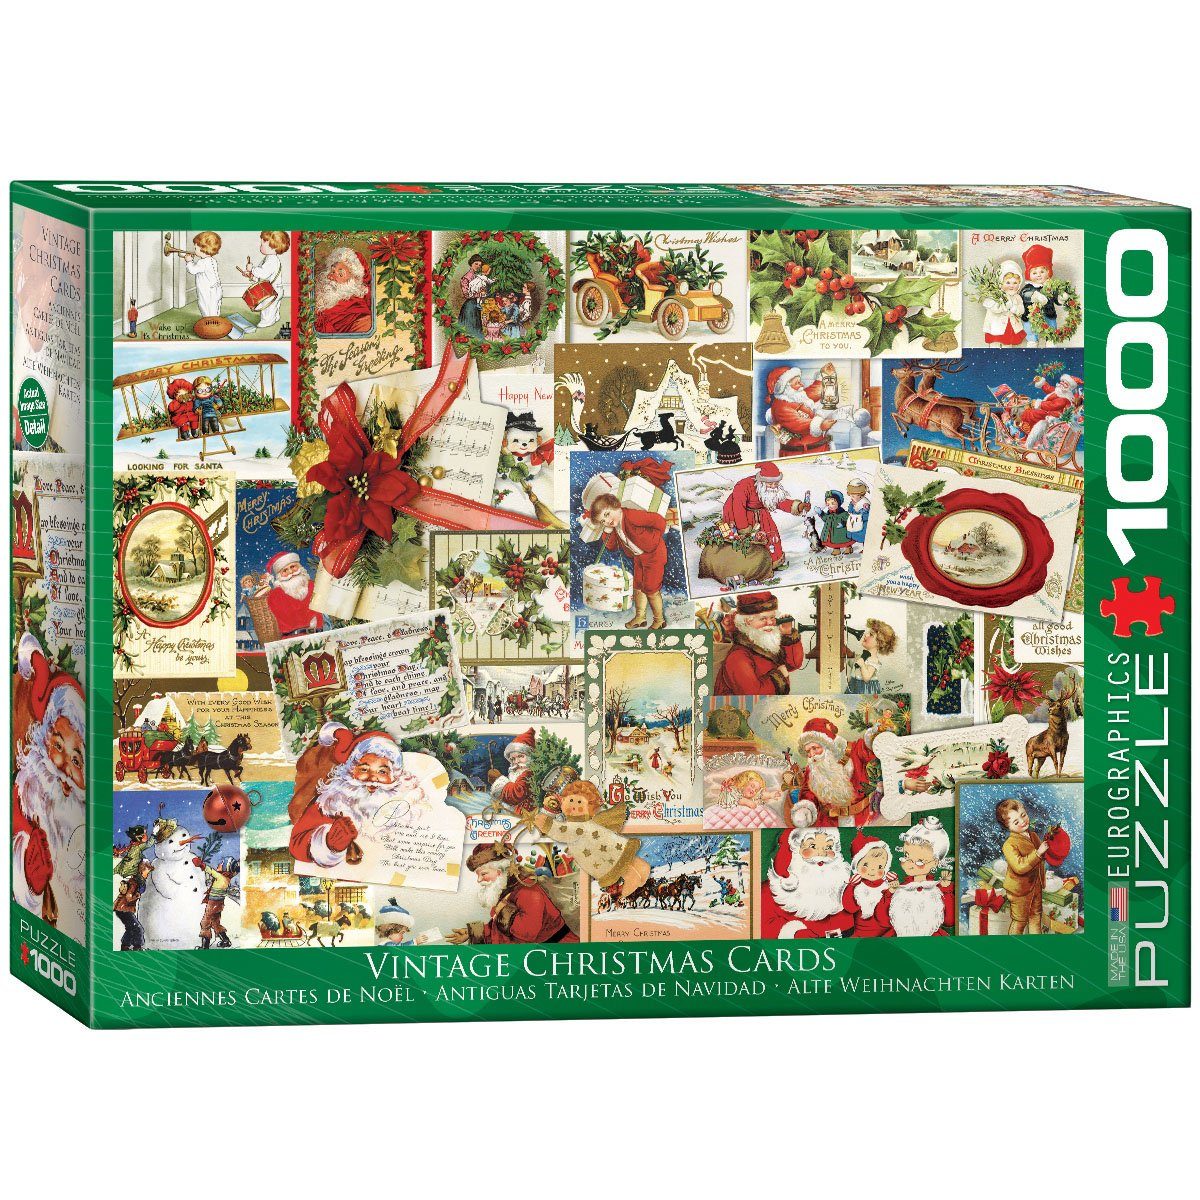 Puzzle, Cards Eurographics Vintage 1000 607841 Christmas Puzzle EUROGRAPHICS Puzzleteile